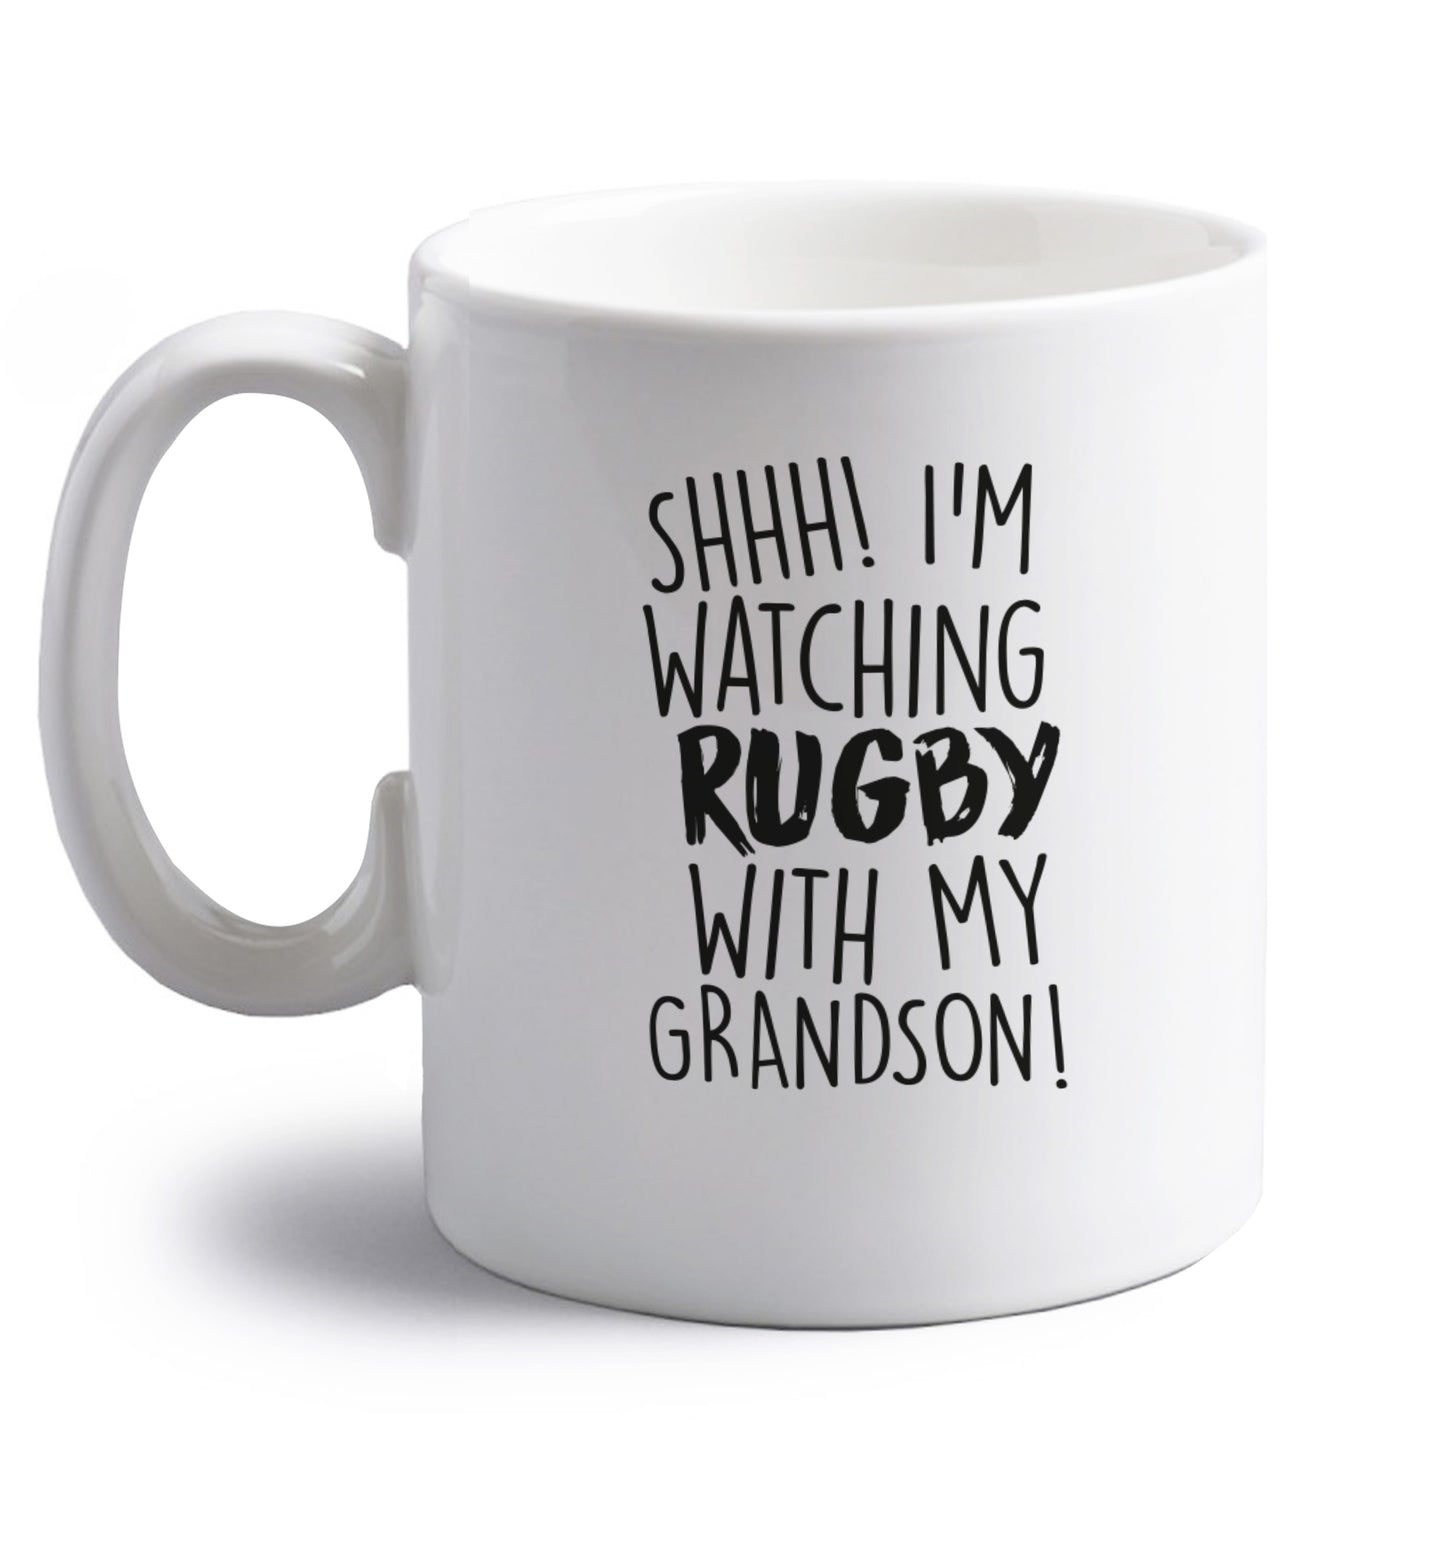 Shh... I'm watching rugby with my dad right handed white ceramic mug 